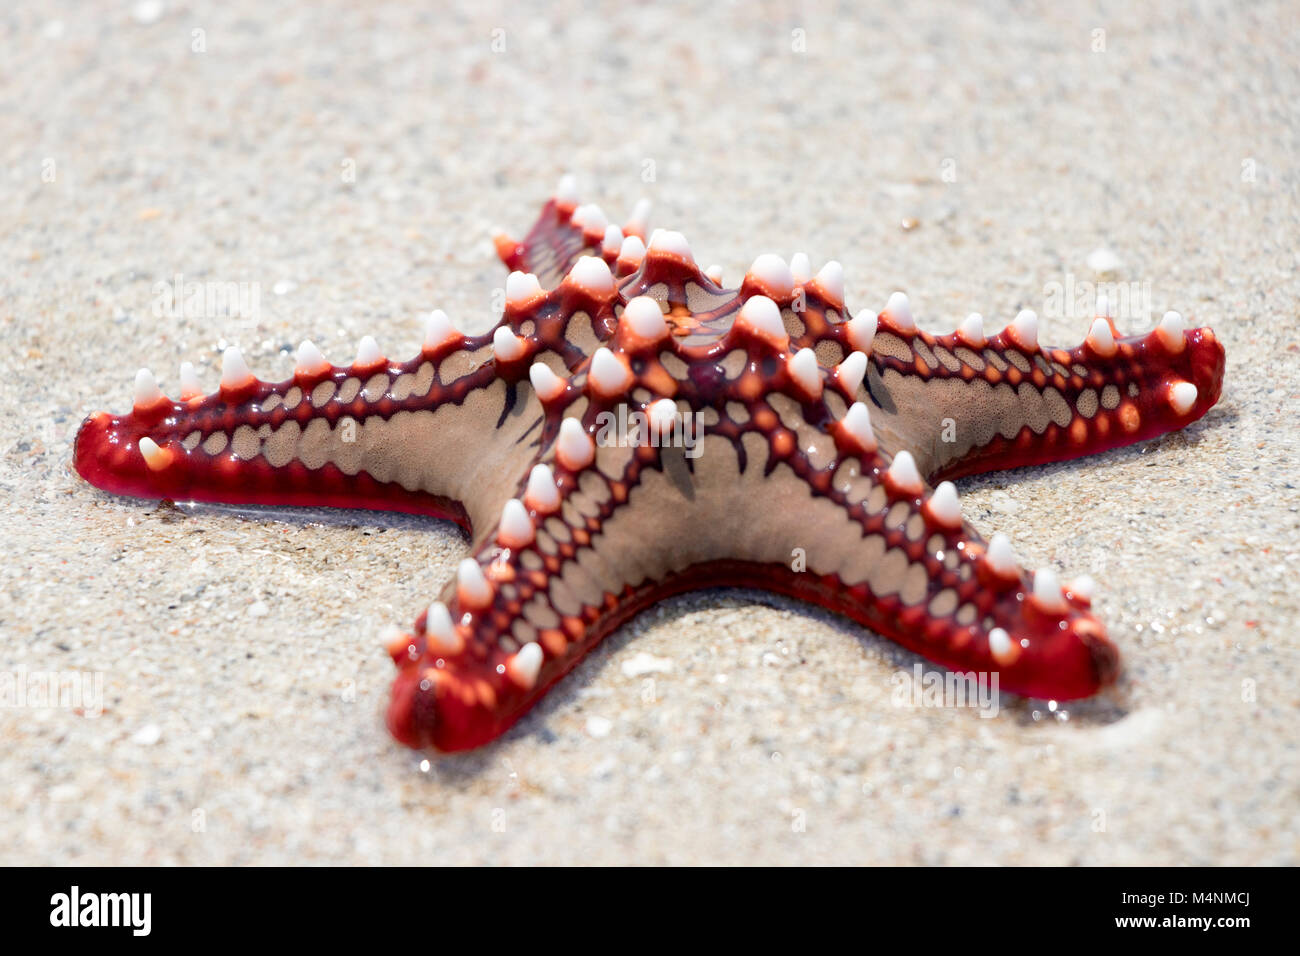 Colorful African red knob sea star or starfish on beach Stock Photo